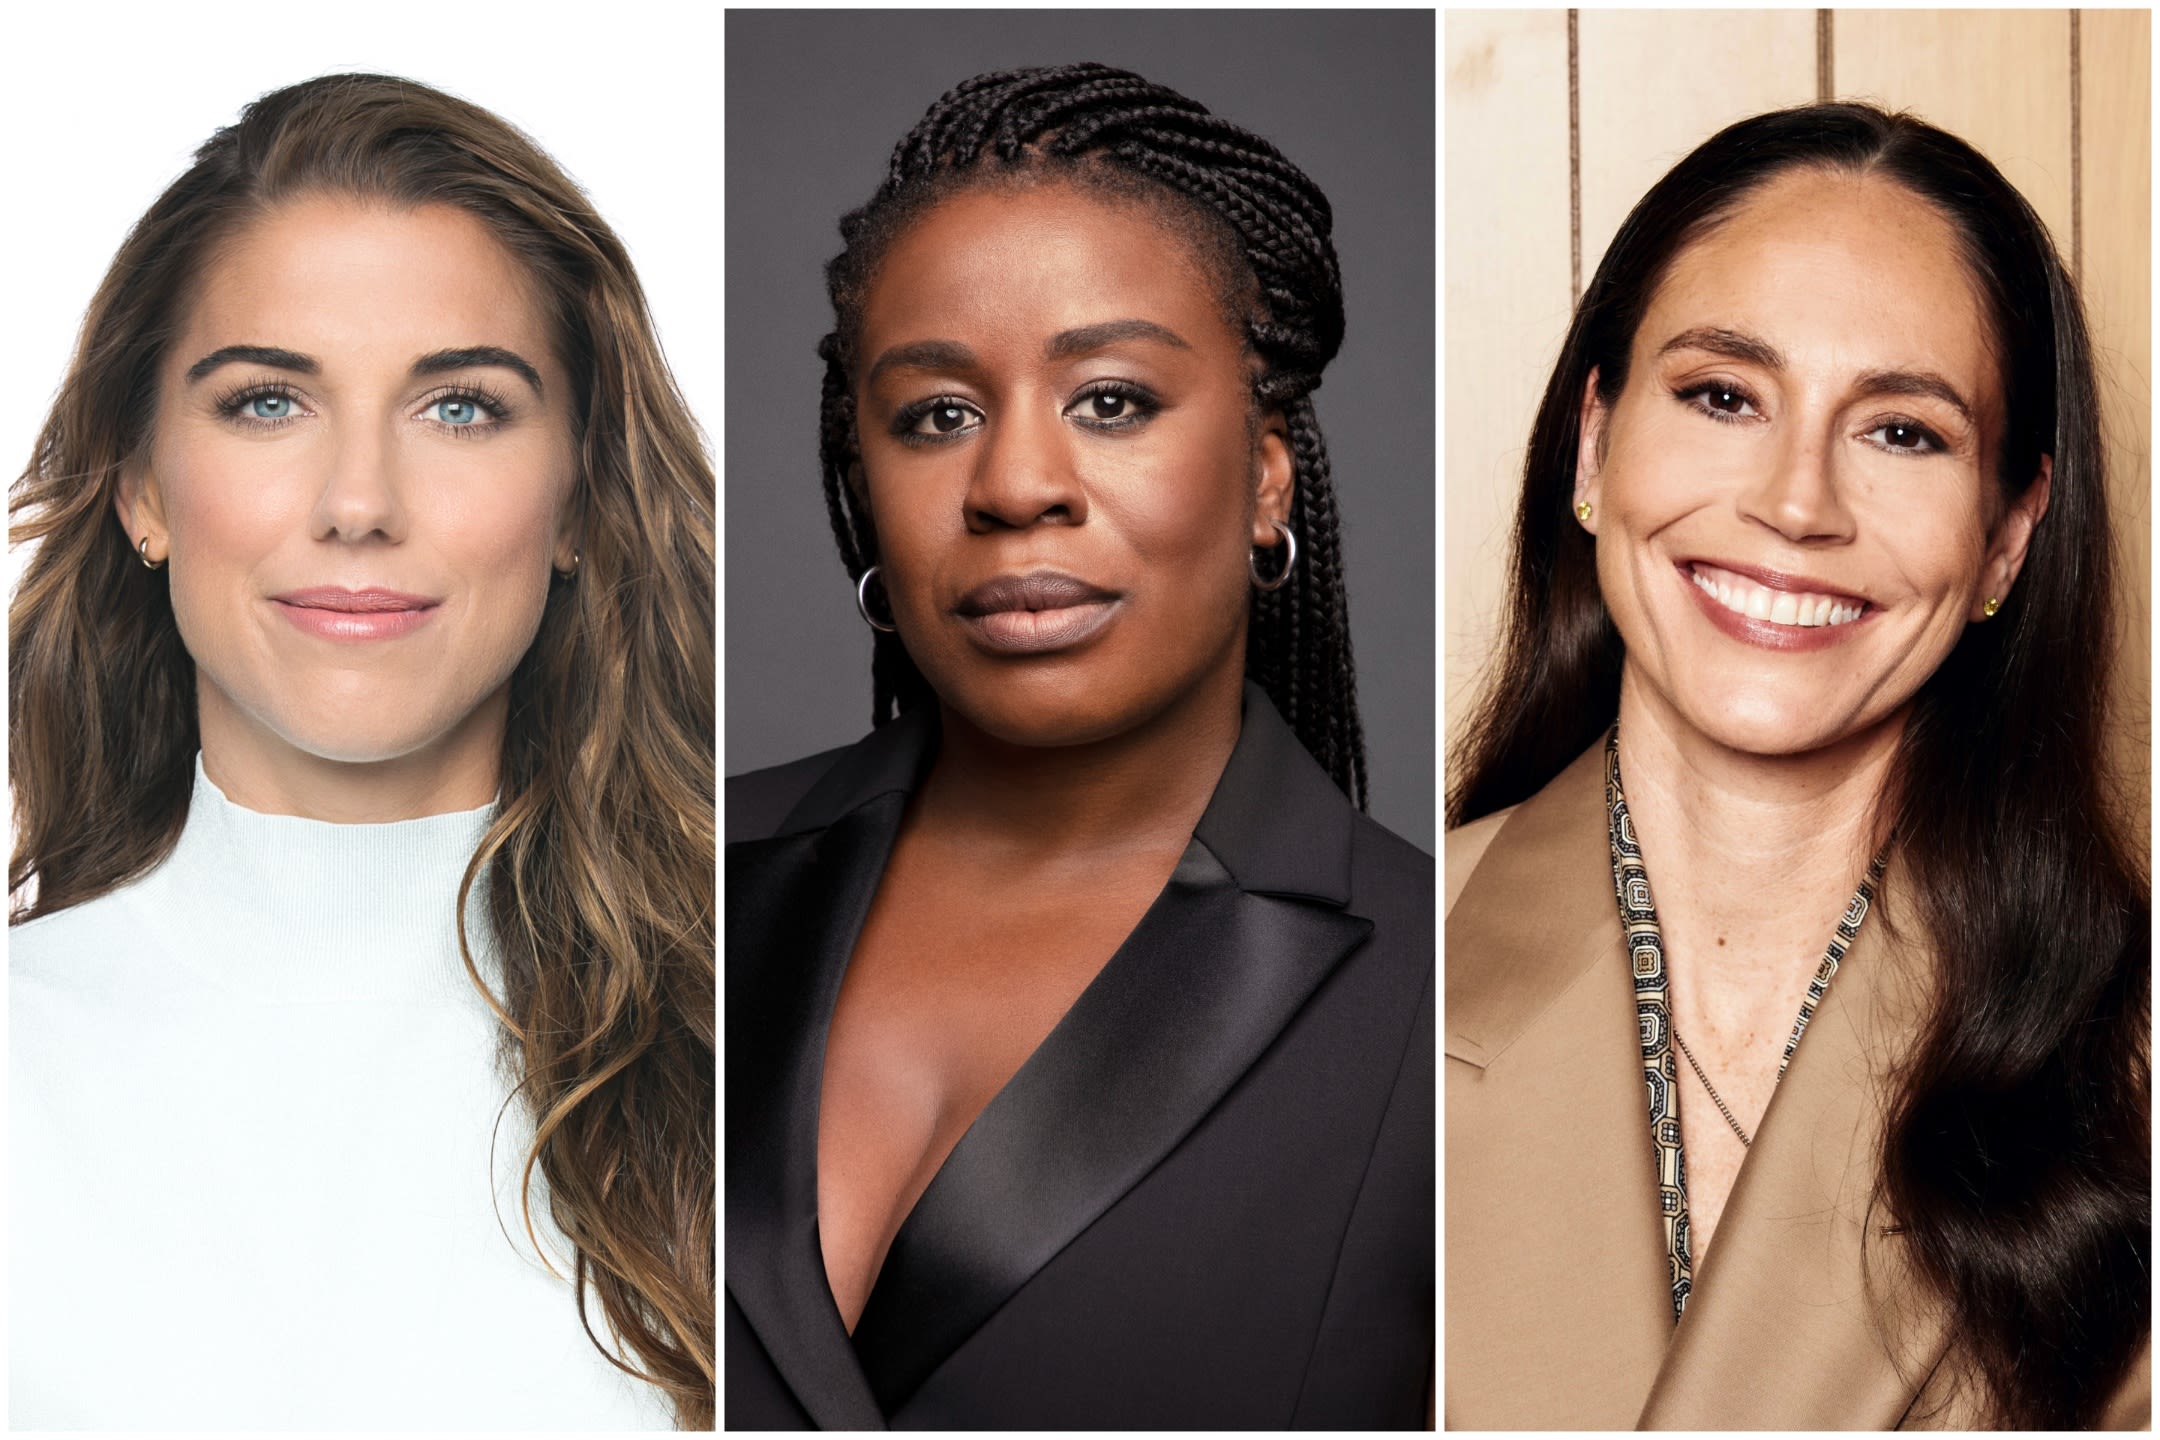 Sue Bird and Alex Morgan Team With Uzo Aduba, CBS Studios for ‘Summer of Gold’ Limited Series (EXCLUSIVE)